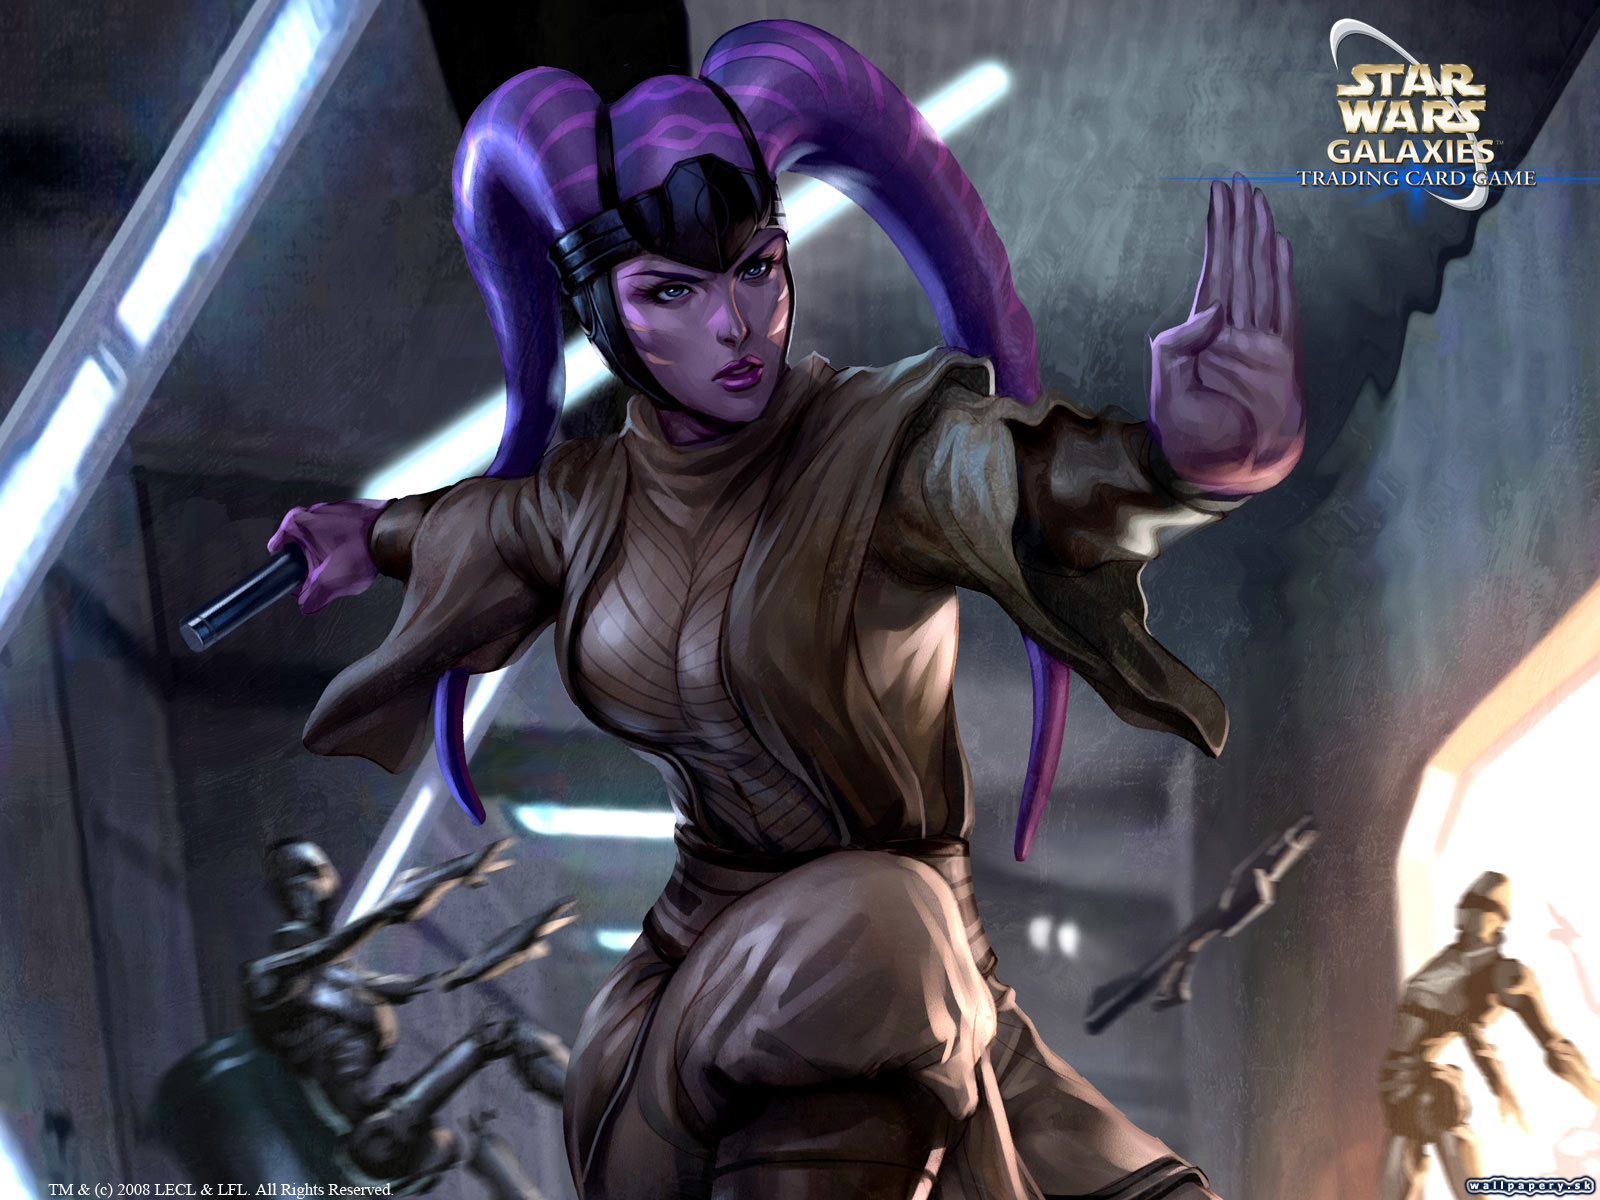 Star Wars Galaxies - Trading Card Game: Champions of the Force - wallpaper 13